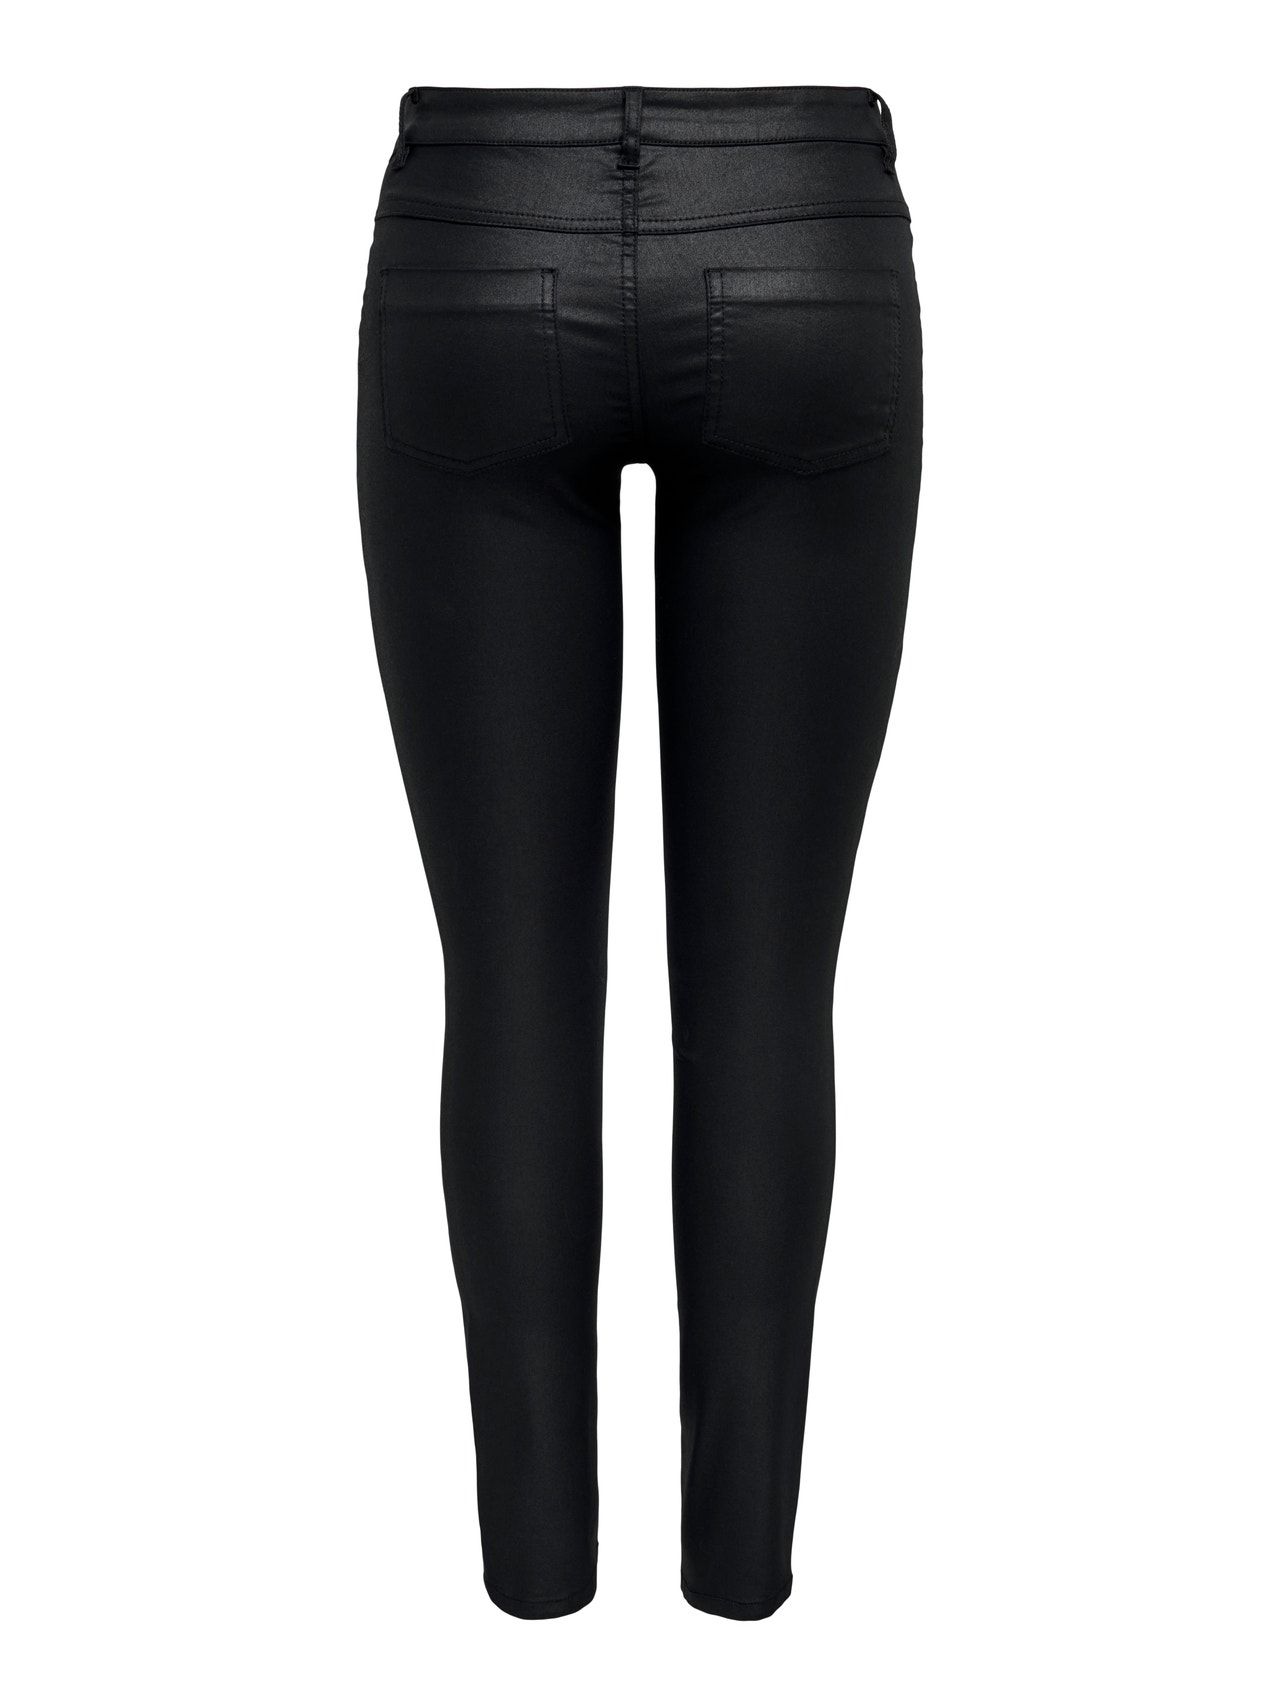 ONLY Skinny Fit Trousers -Black - 15312520